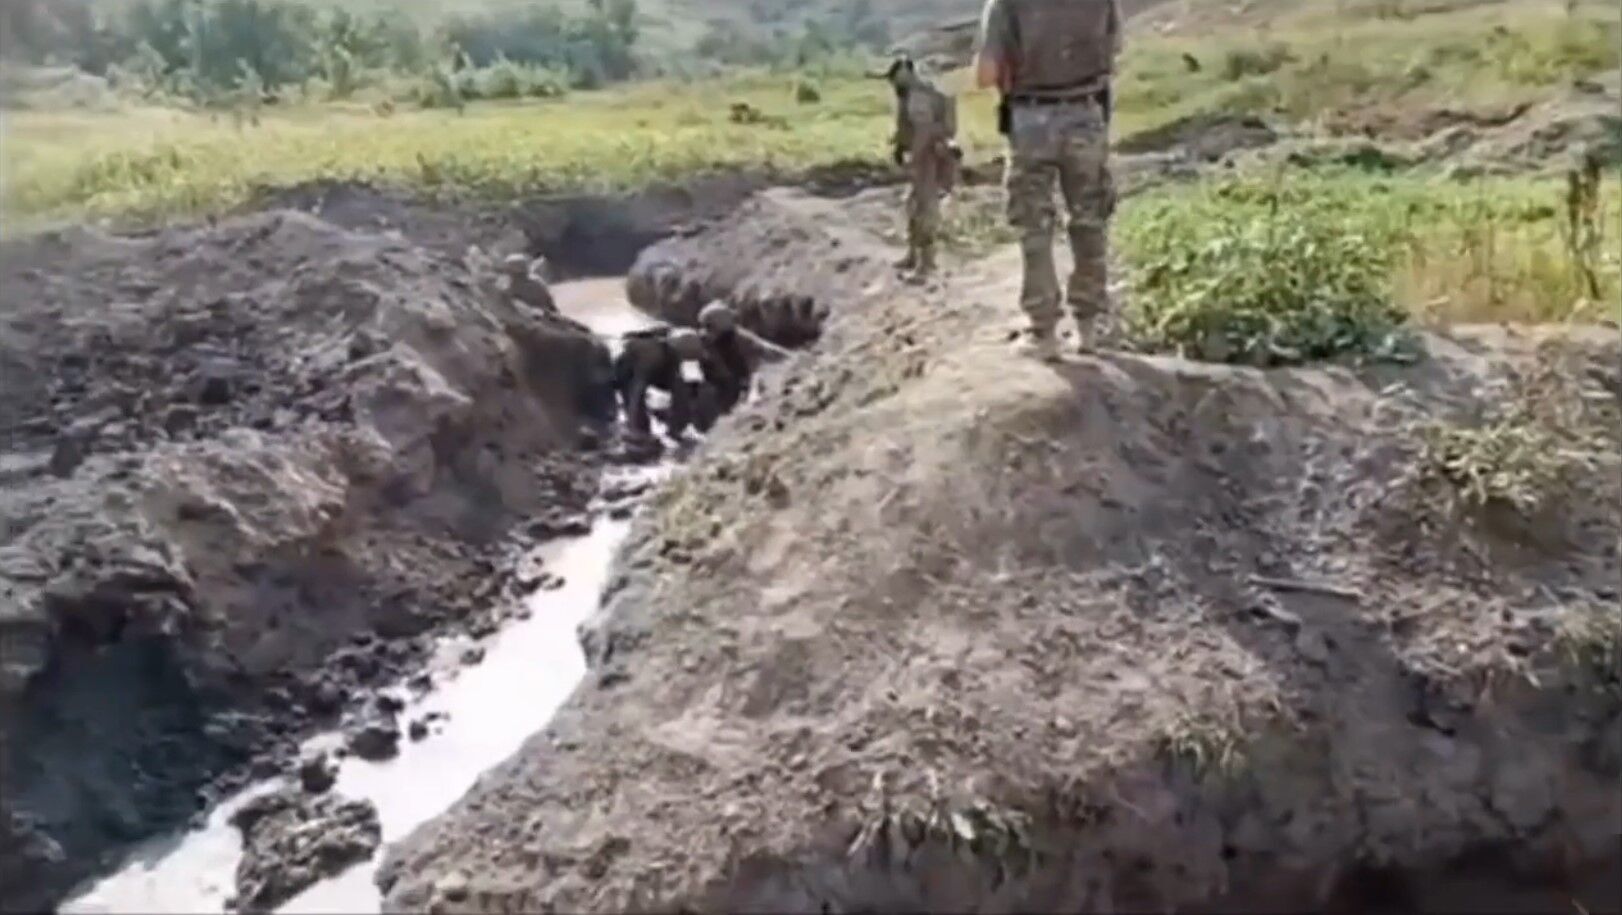 AFU soldiers prepare for assaults in extremely difficult conditions: footage of flooded trenches appeared 